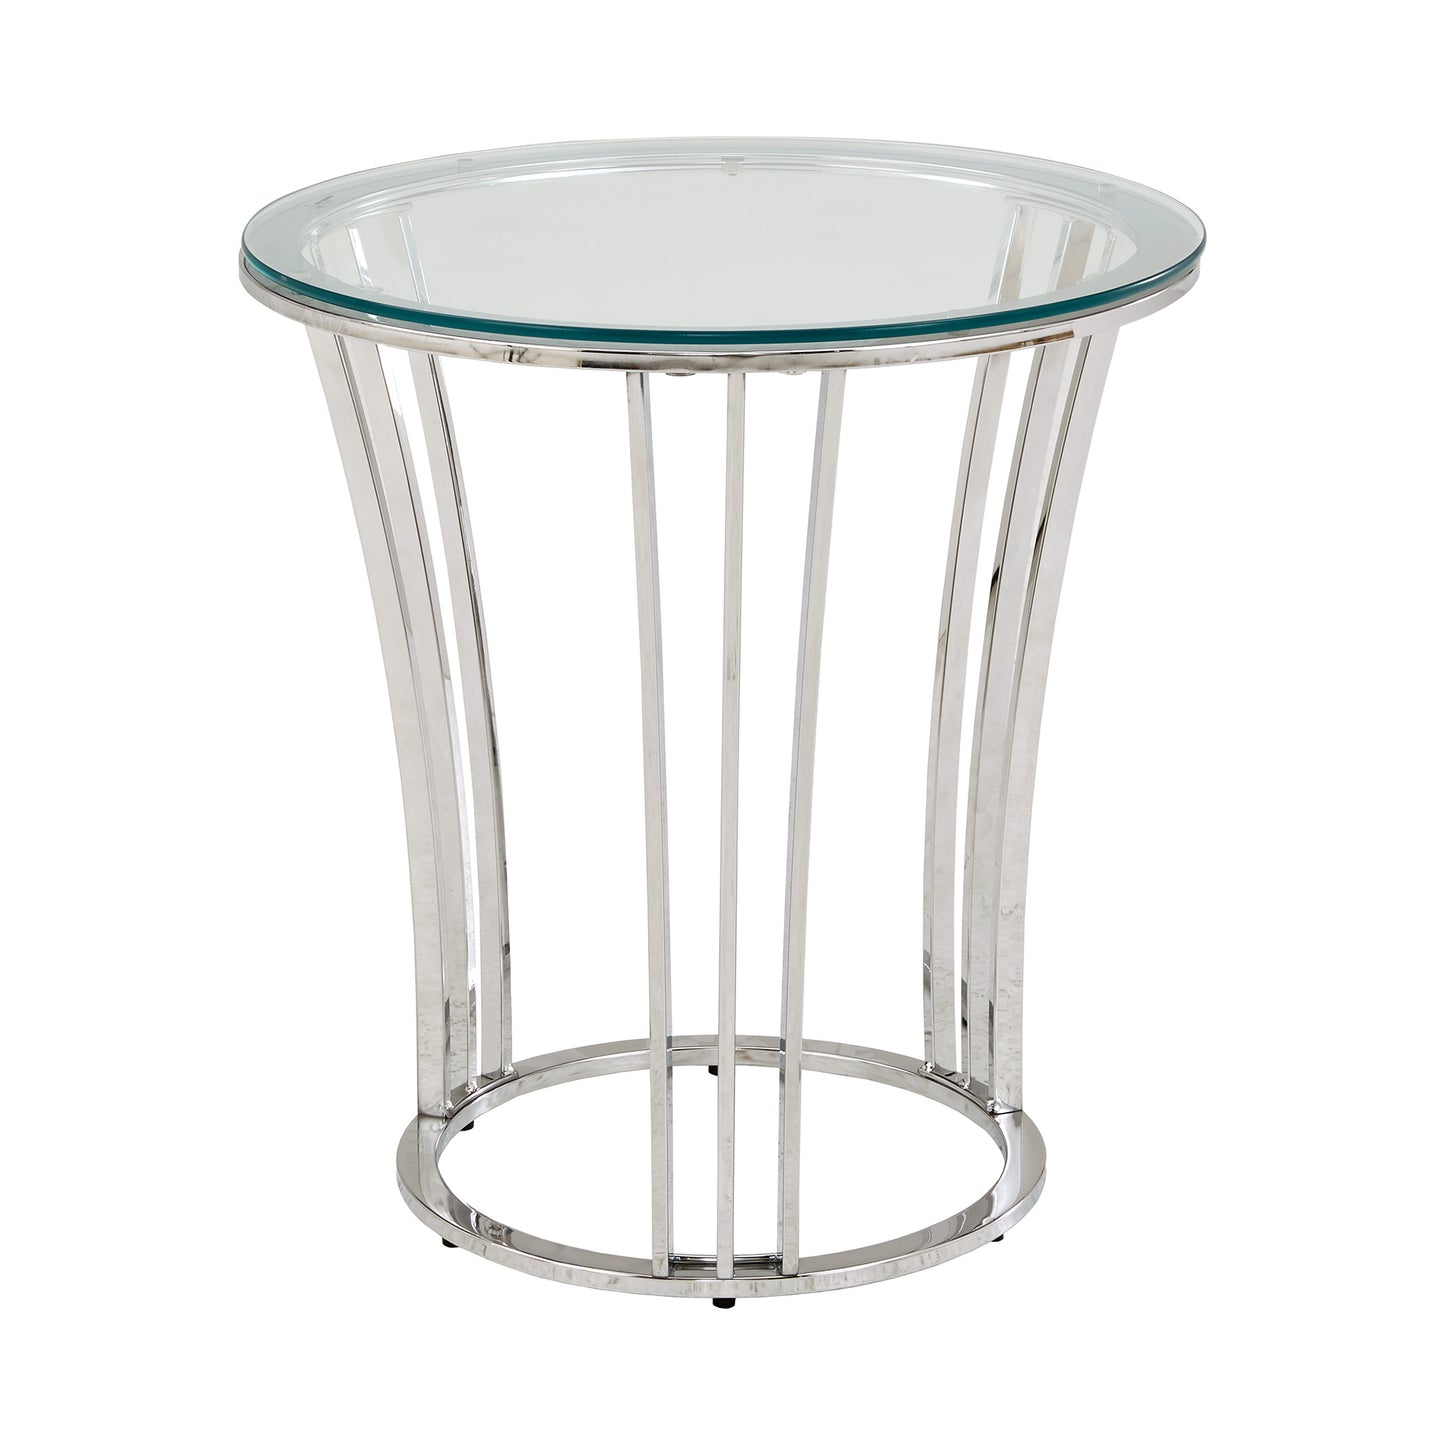 Chrome Finish Table with Glass Top - Coffee Table and End Table Set